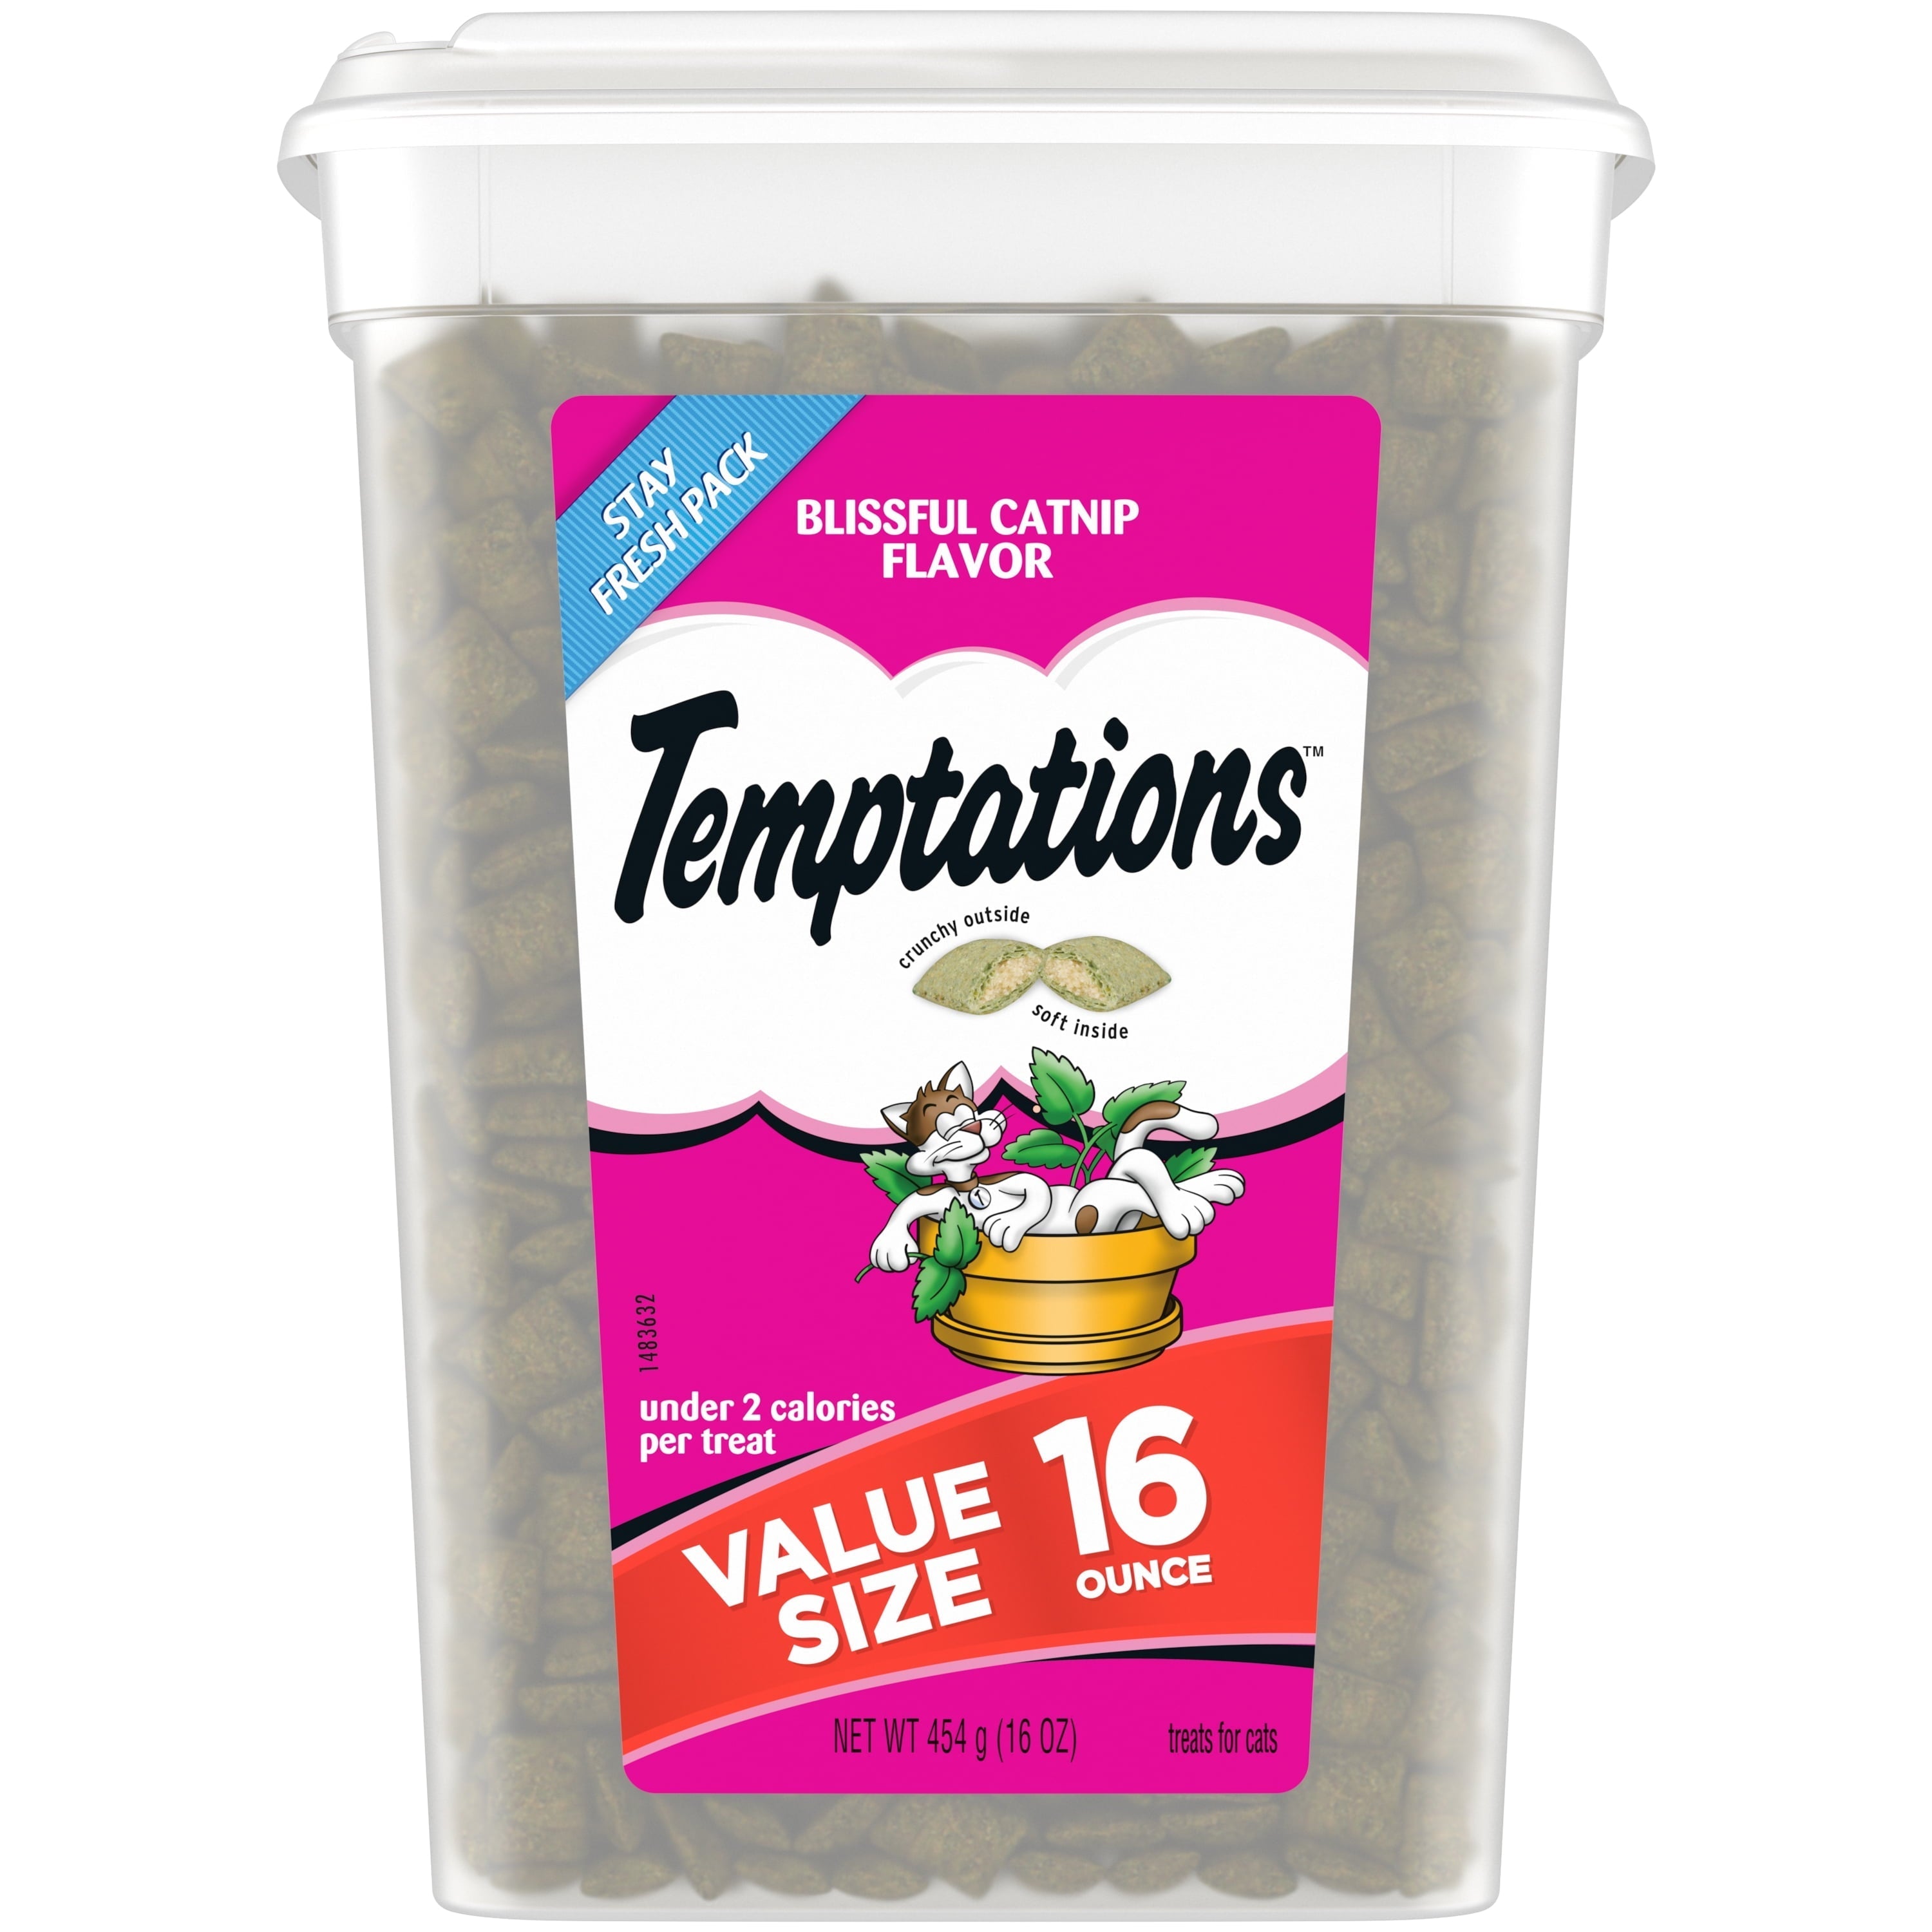 Wholesale prices with free shipping all over United States Temptations Classic, Crunchy and Soft Cat Treats, Blissful Catnip Flavor, 16 oz. Tub - Steven Deals